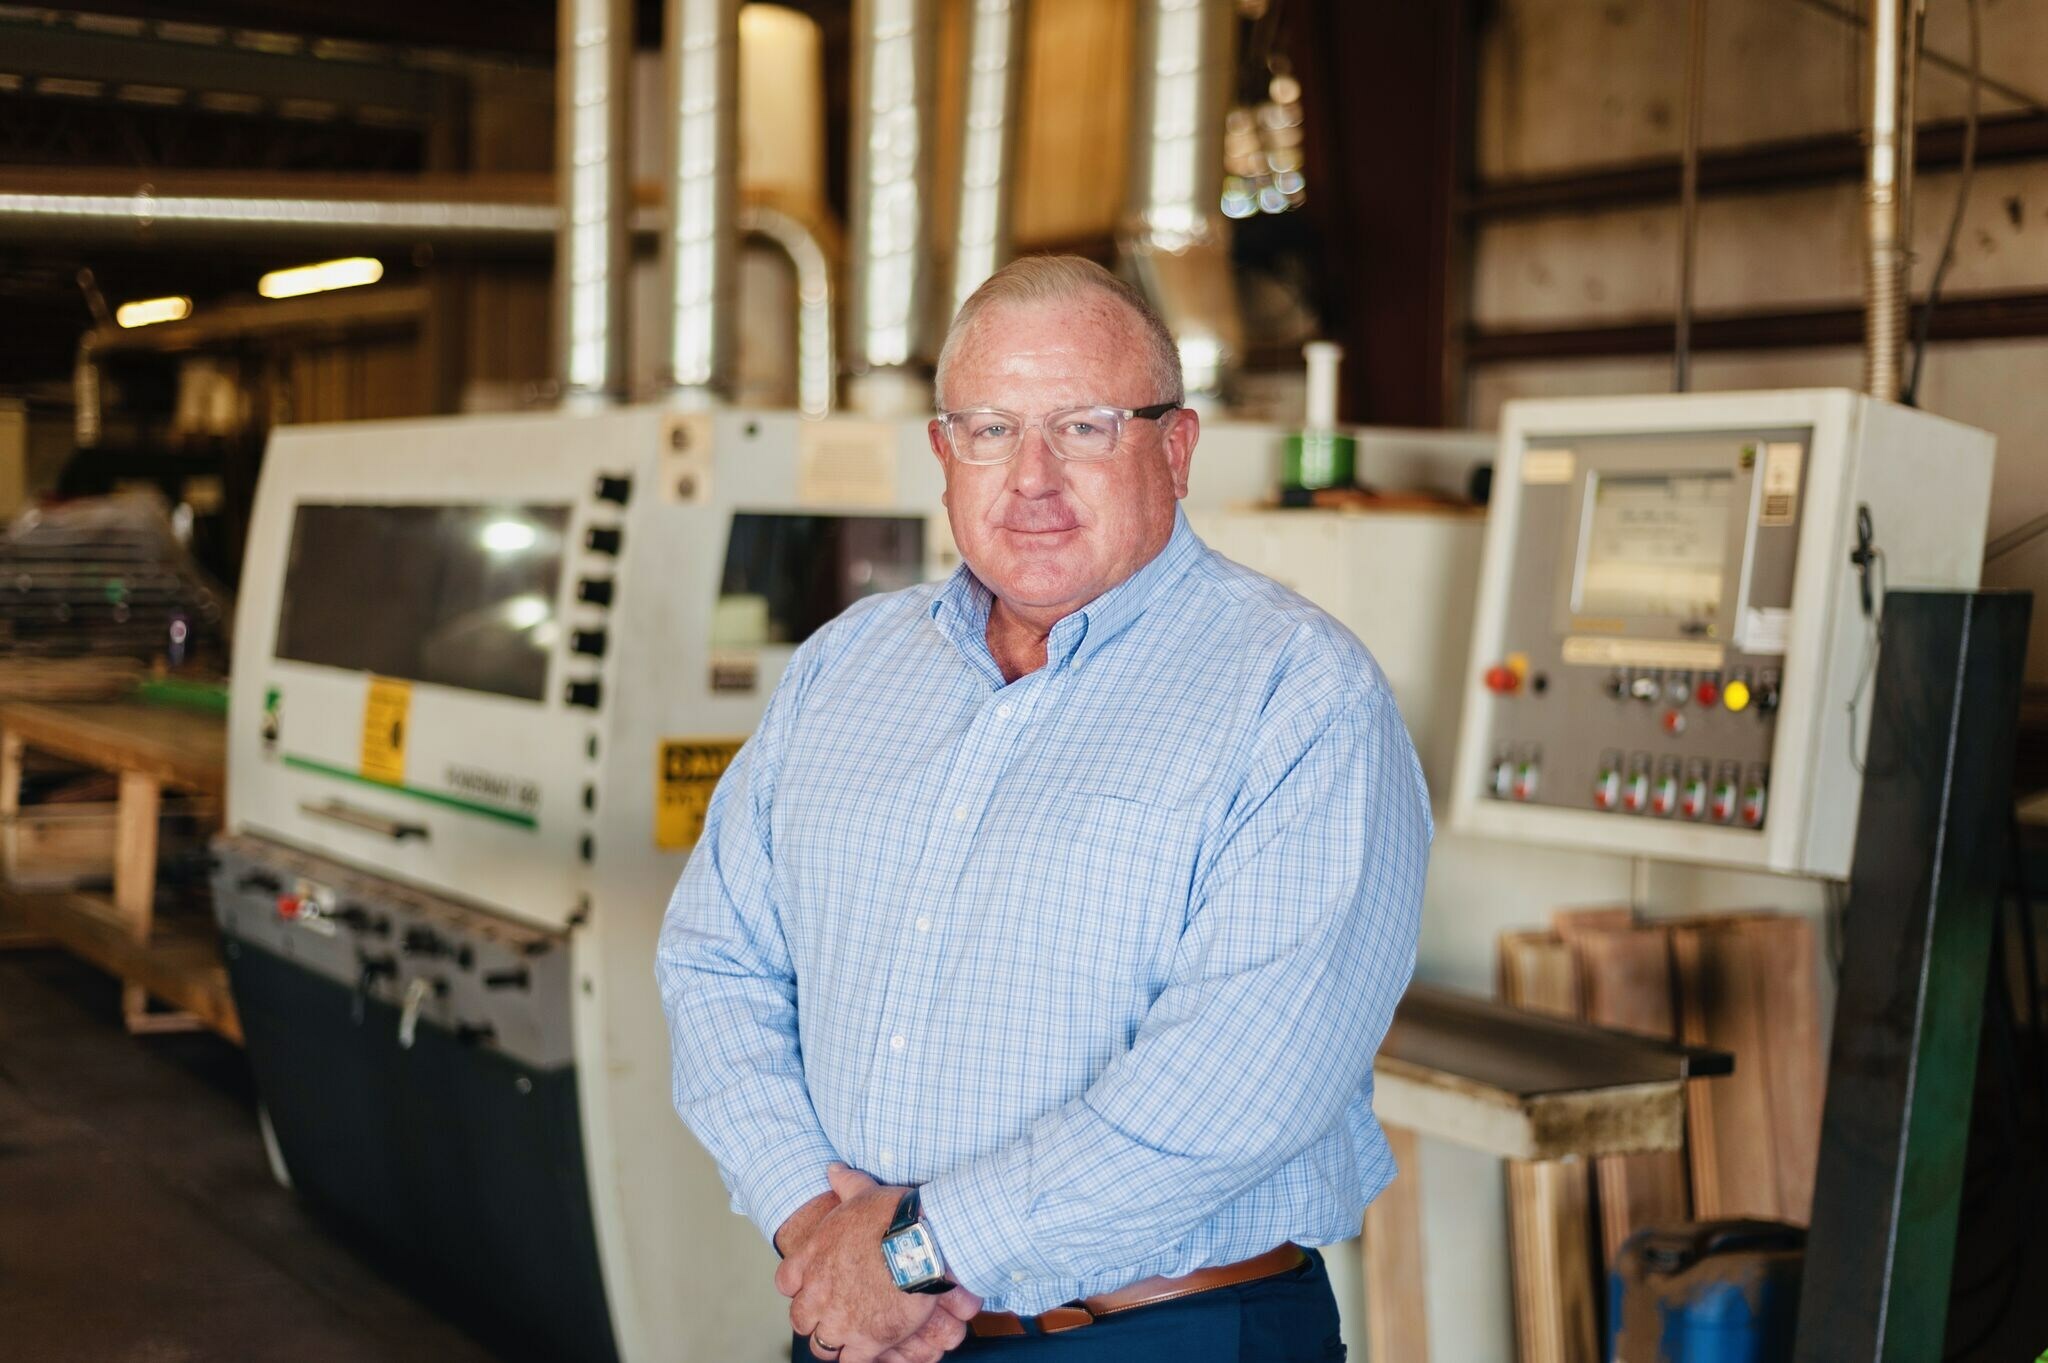 Bruce Hardt stands before a computer-controlled wood moulder capable of milling millions of square feet of hardwood flooring, trim and more.